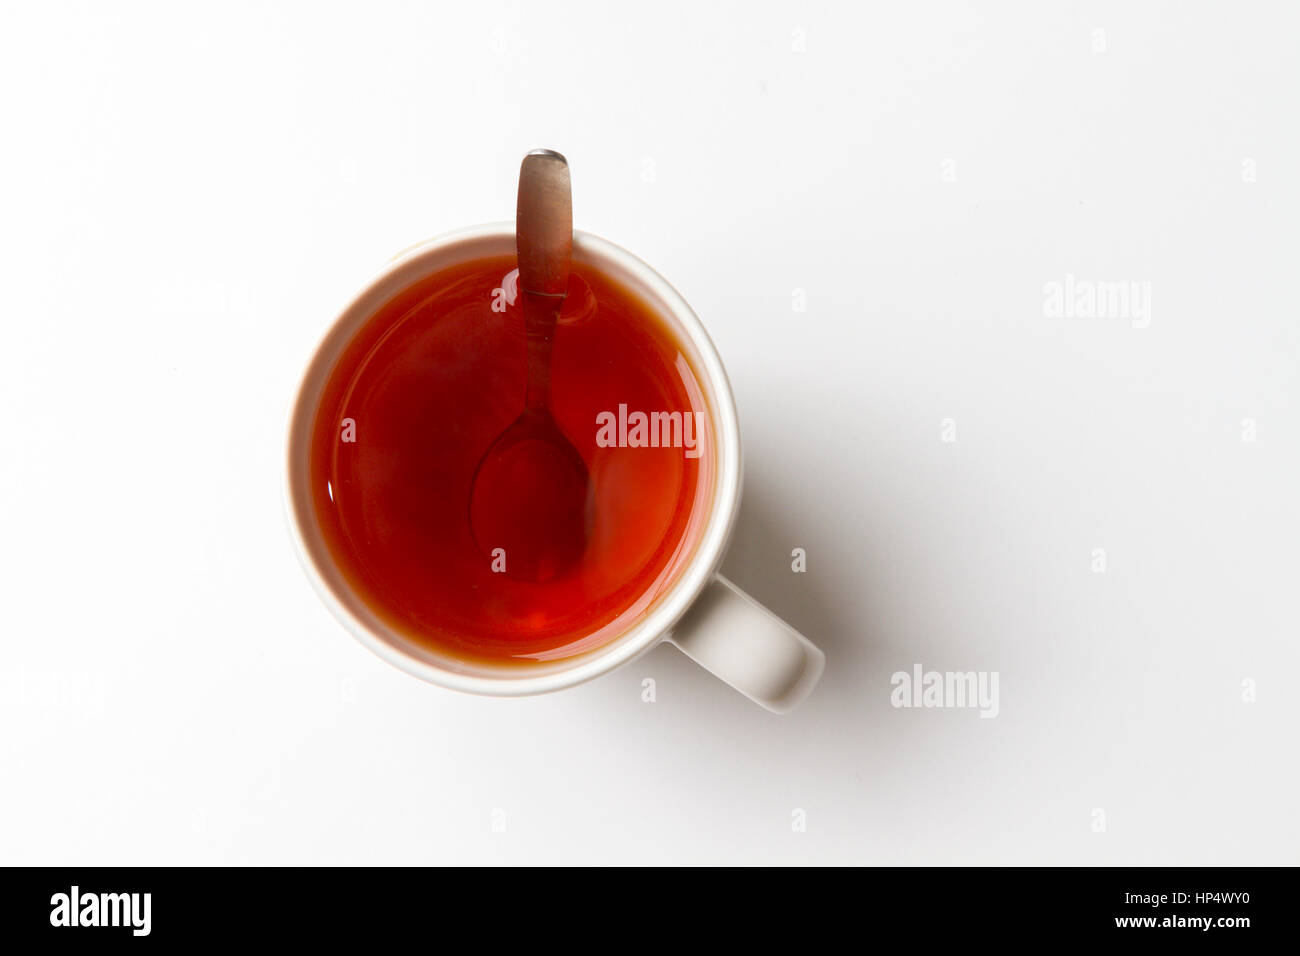 a cup of tea with spoon on a white background. Landscape mode, isolated, top view. Stock Photo